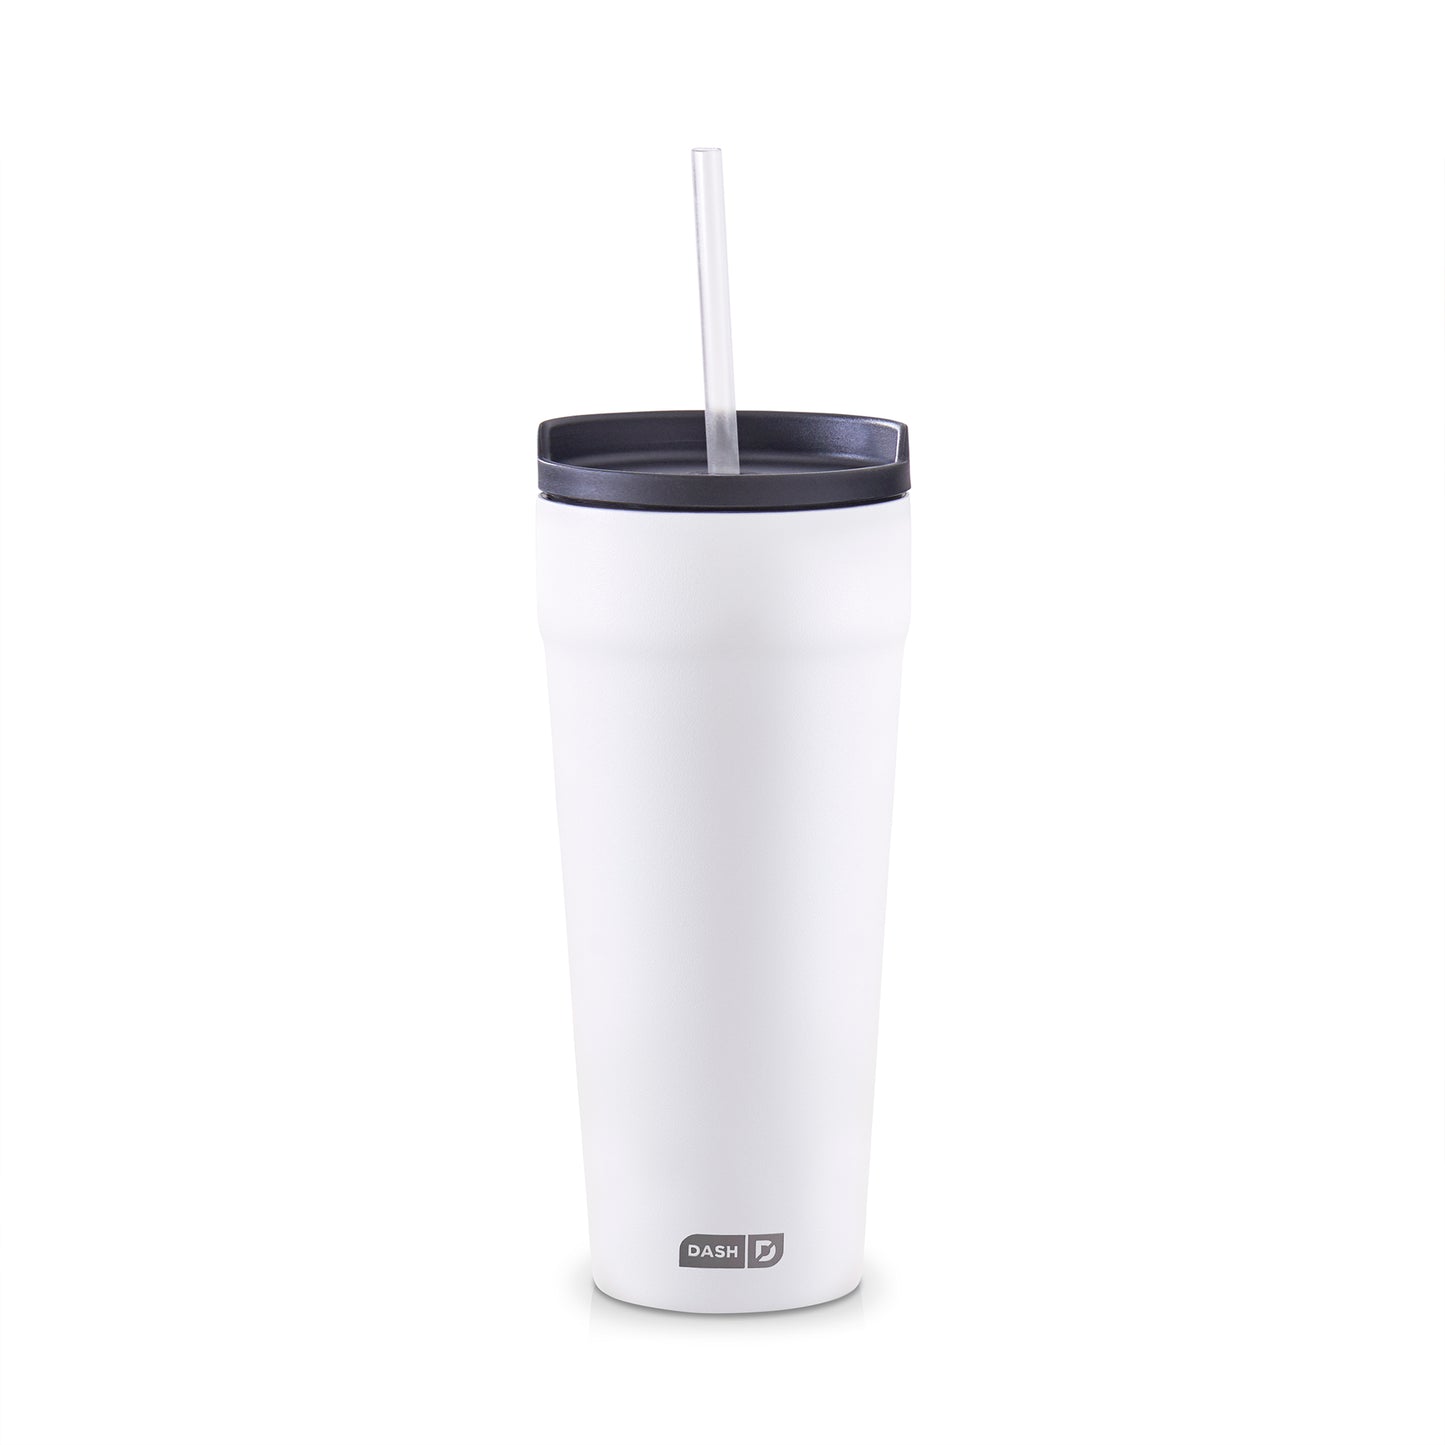 2-in-1 Spill-Proof Insulated Tumbler Tools and Gadgets Dash White  